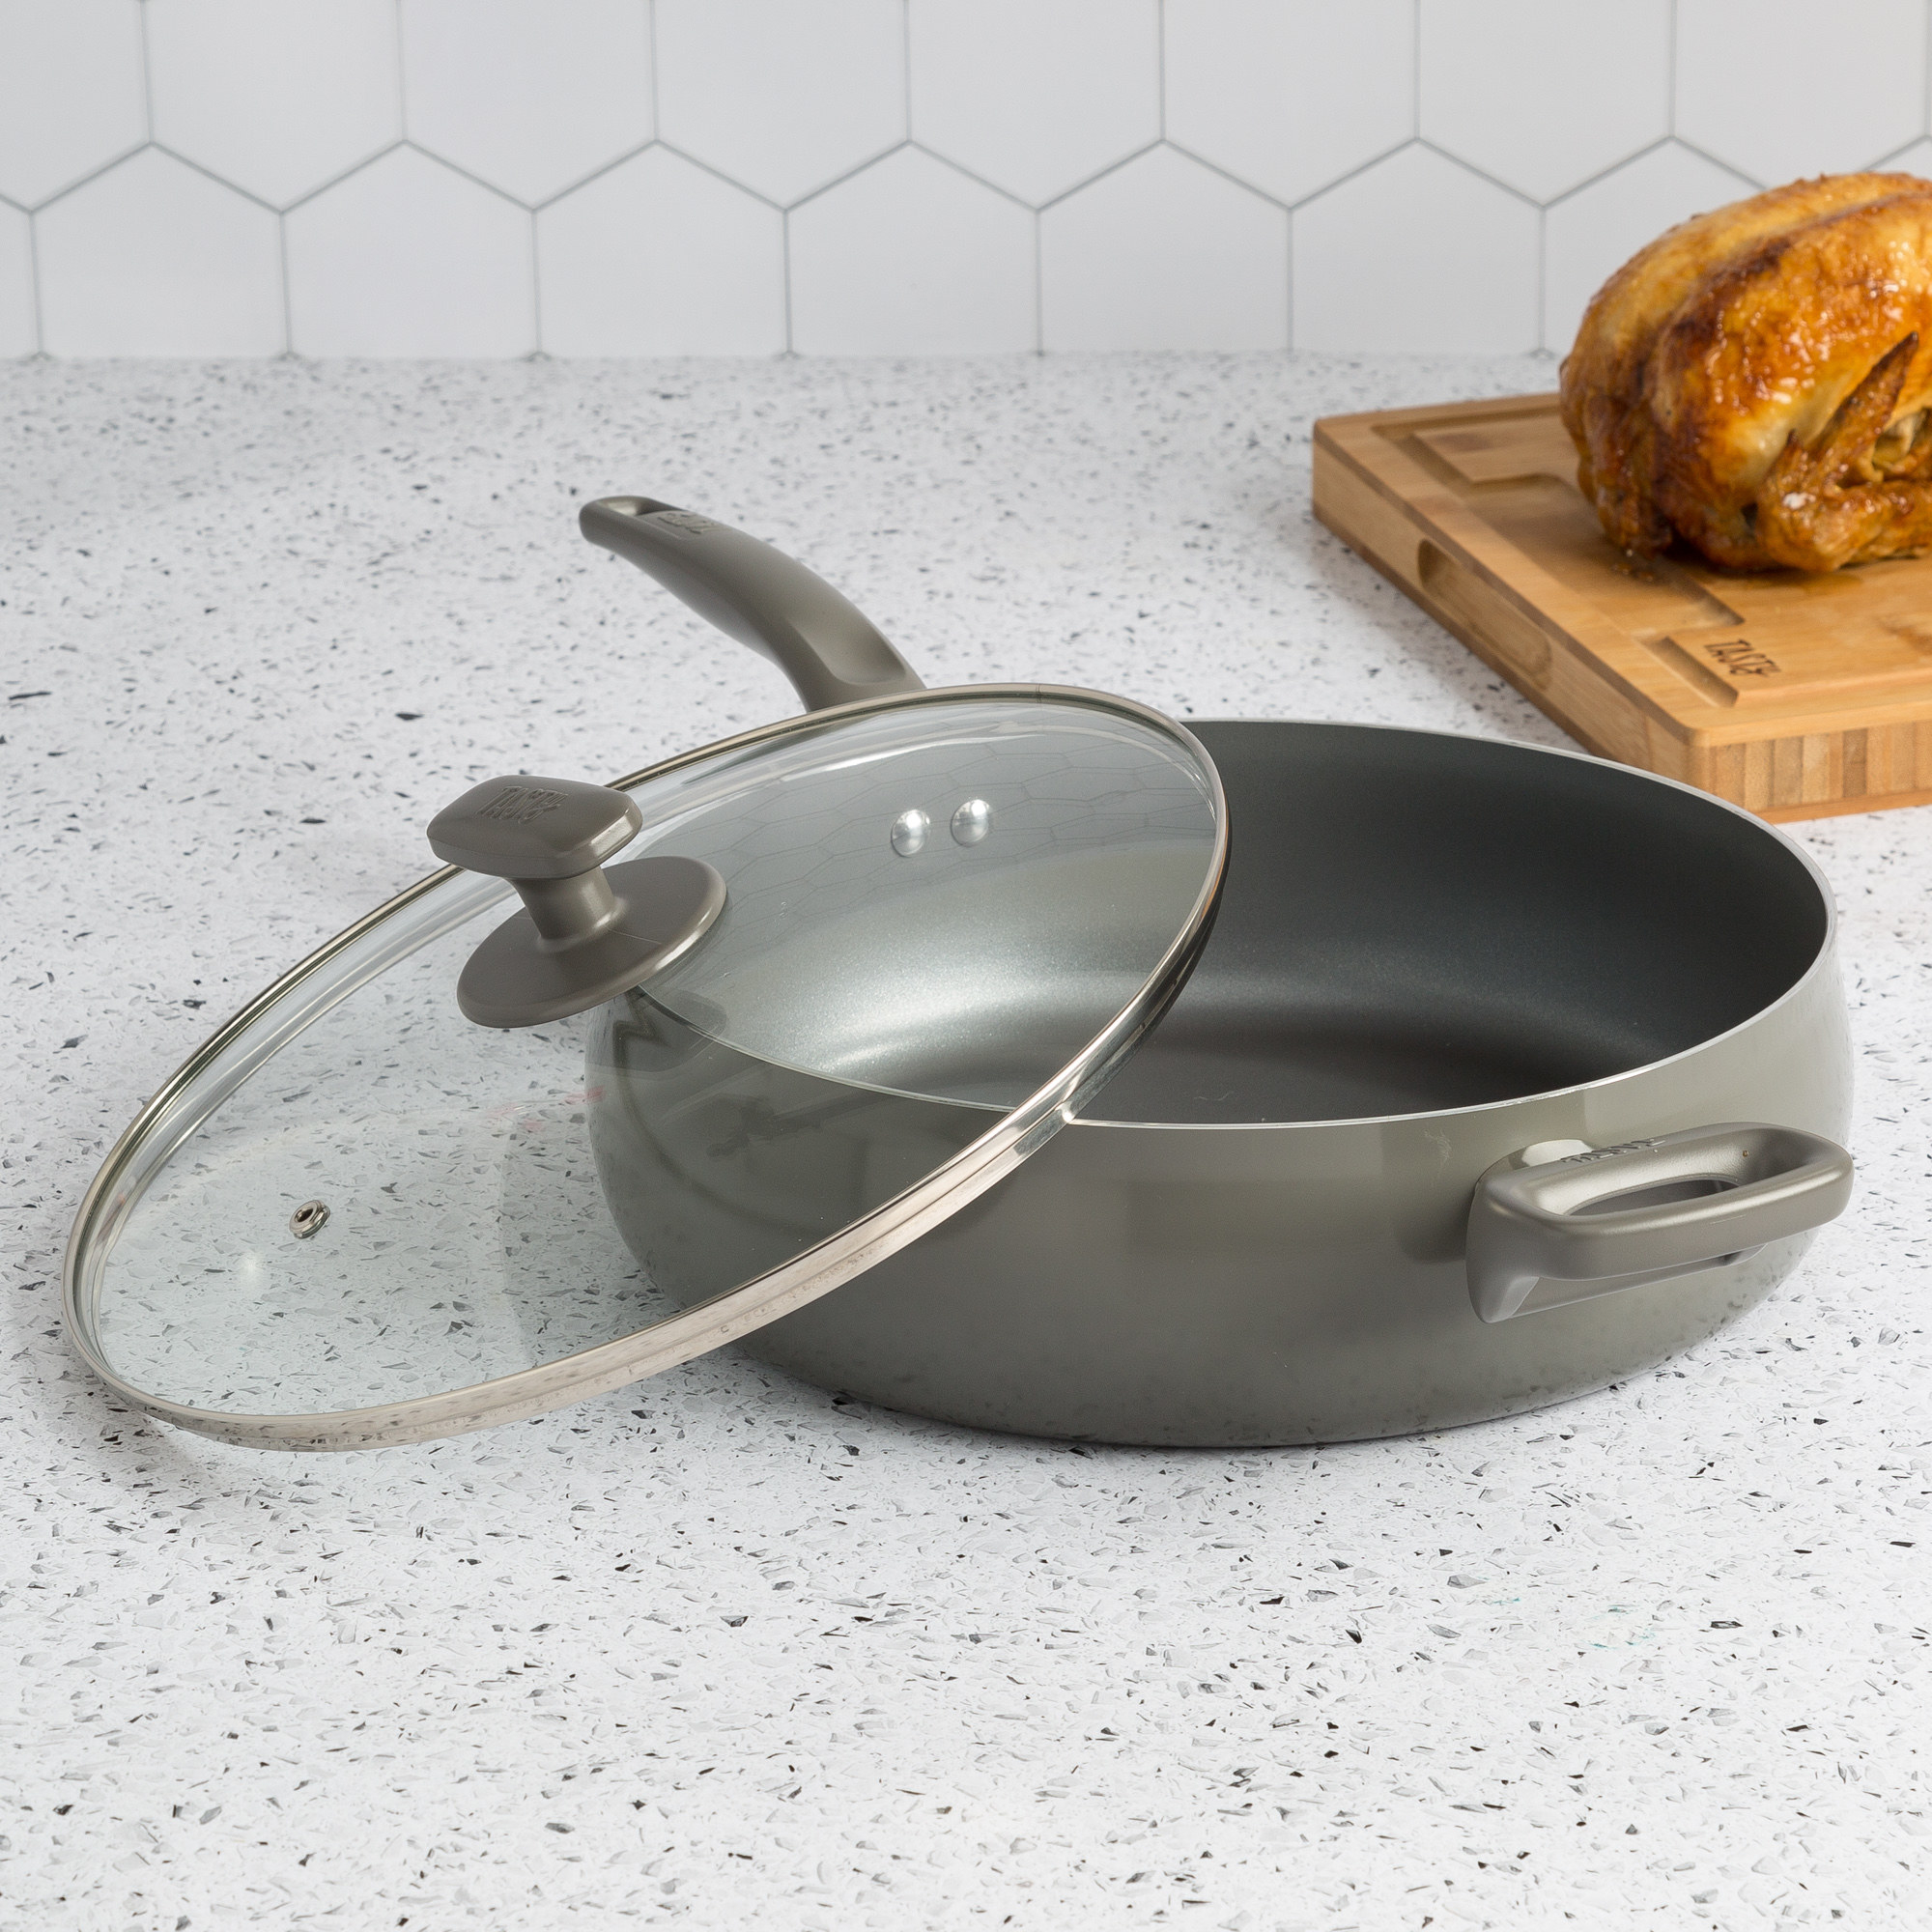 Tasty cast aluminum cookware changes the game. With unique functionality  coupled with beautiful design, they're the perfect addition to…